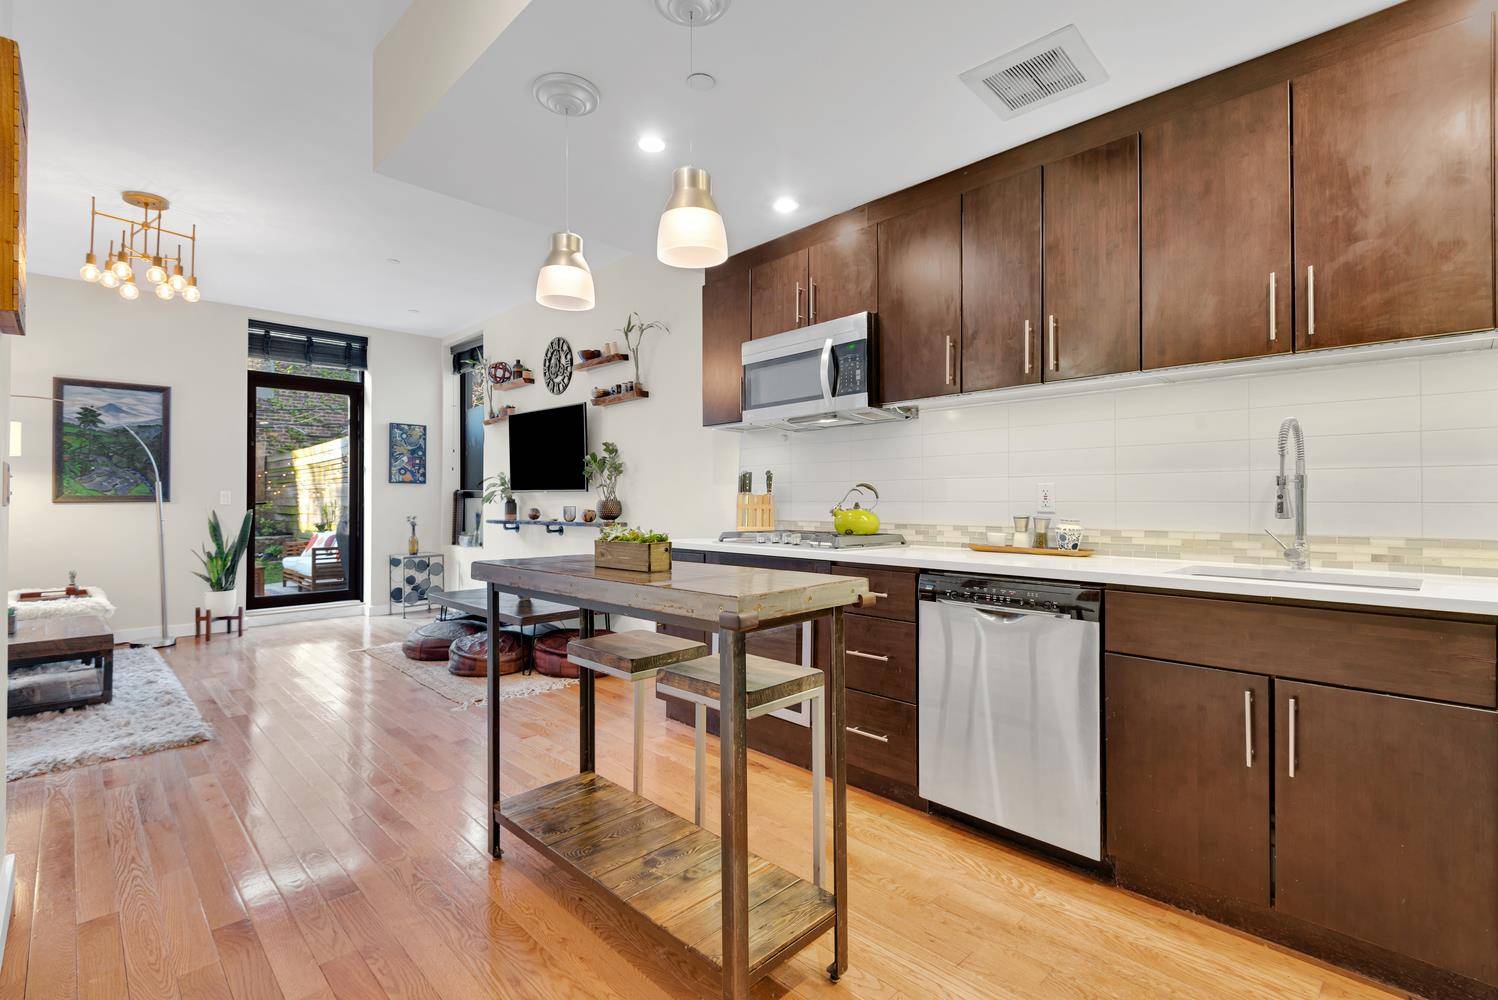 This duplex stunner has so much to love in a Brooklyn home spacious living quarters with natural light and white oak floors, a roomy lower level with radiant heated flooring, ...